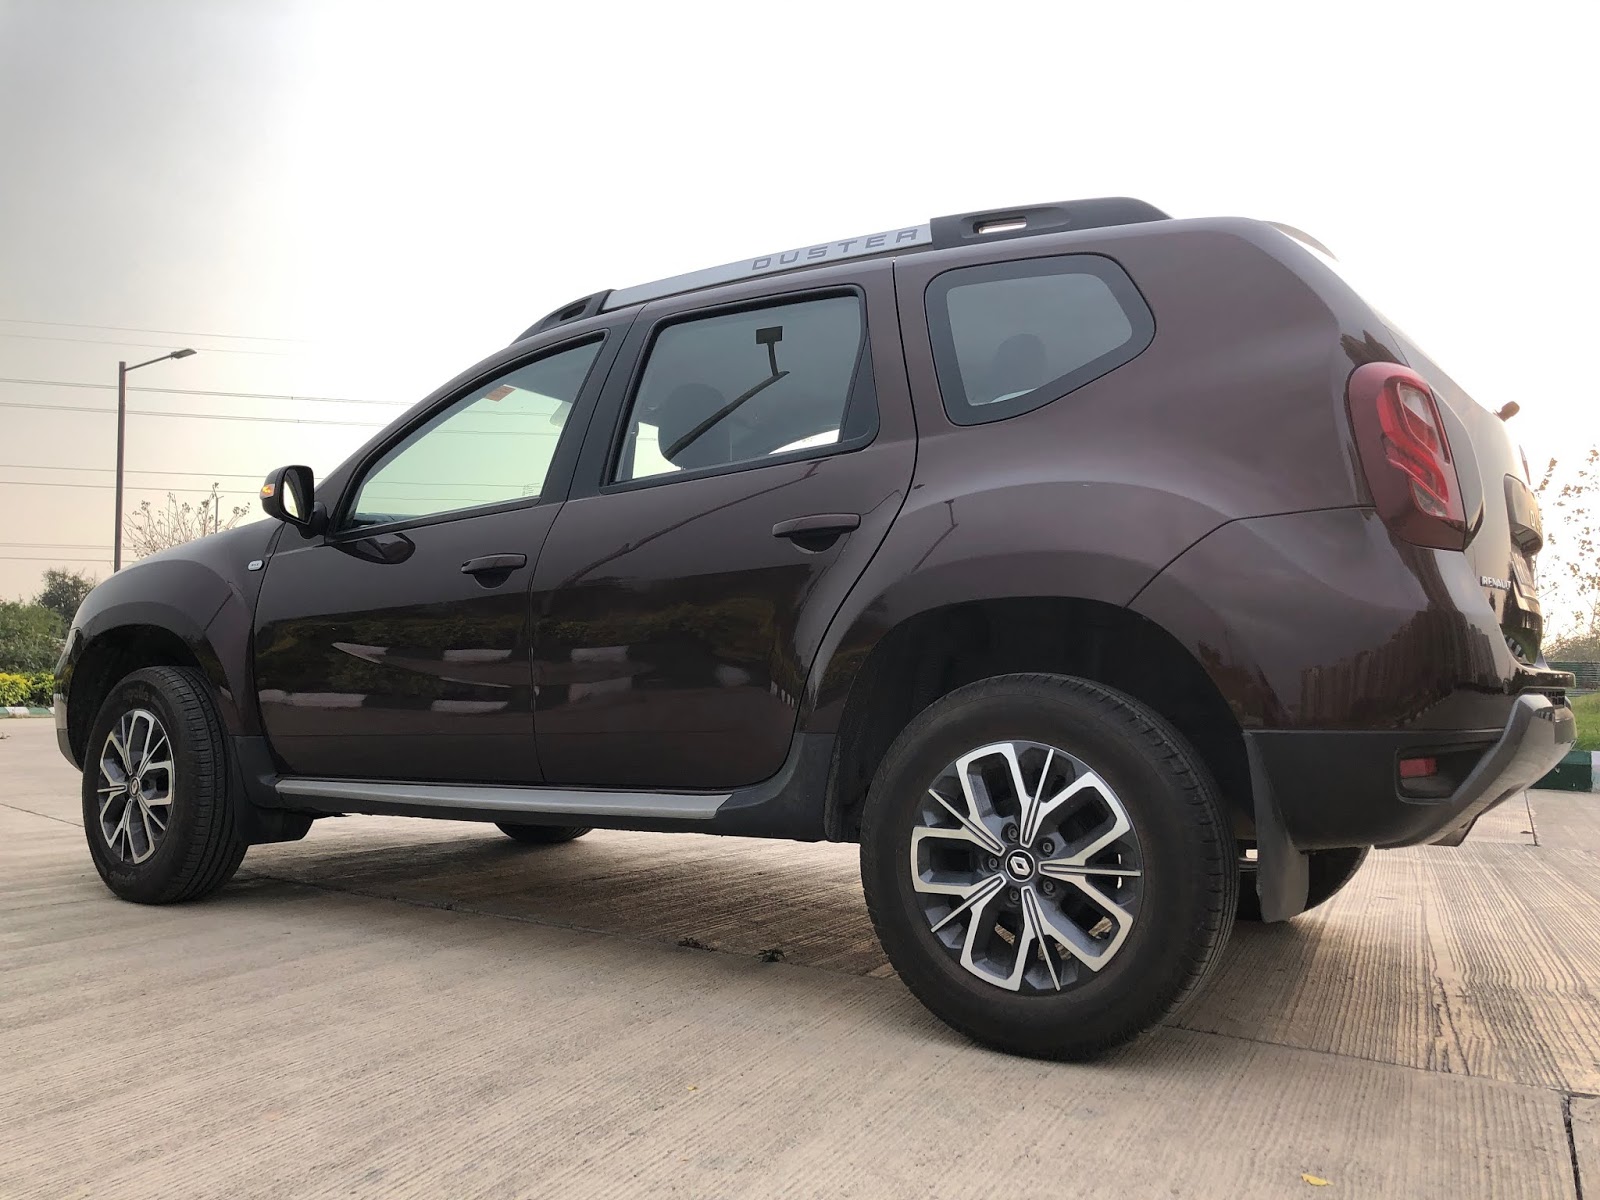 Renault Duster RXZ 110PS AMT dCi Easy-R variant